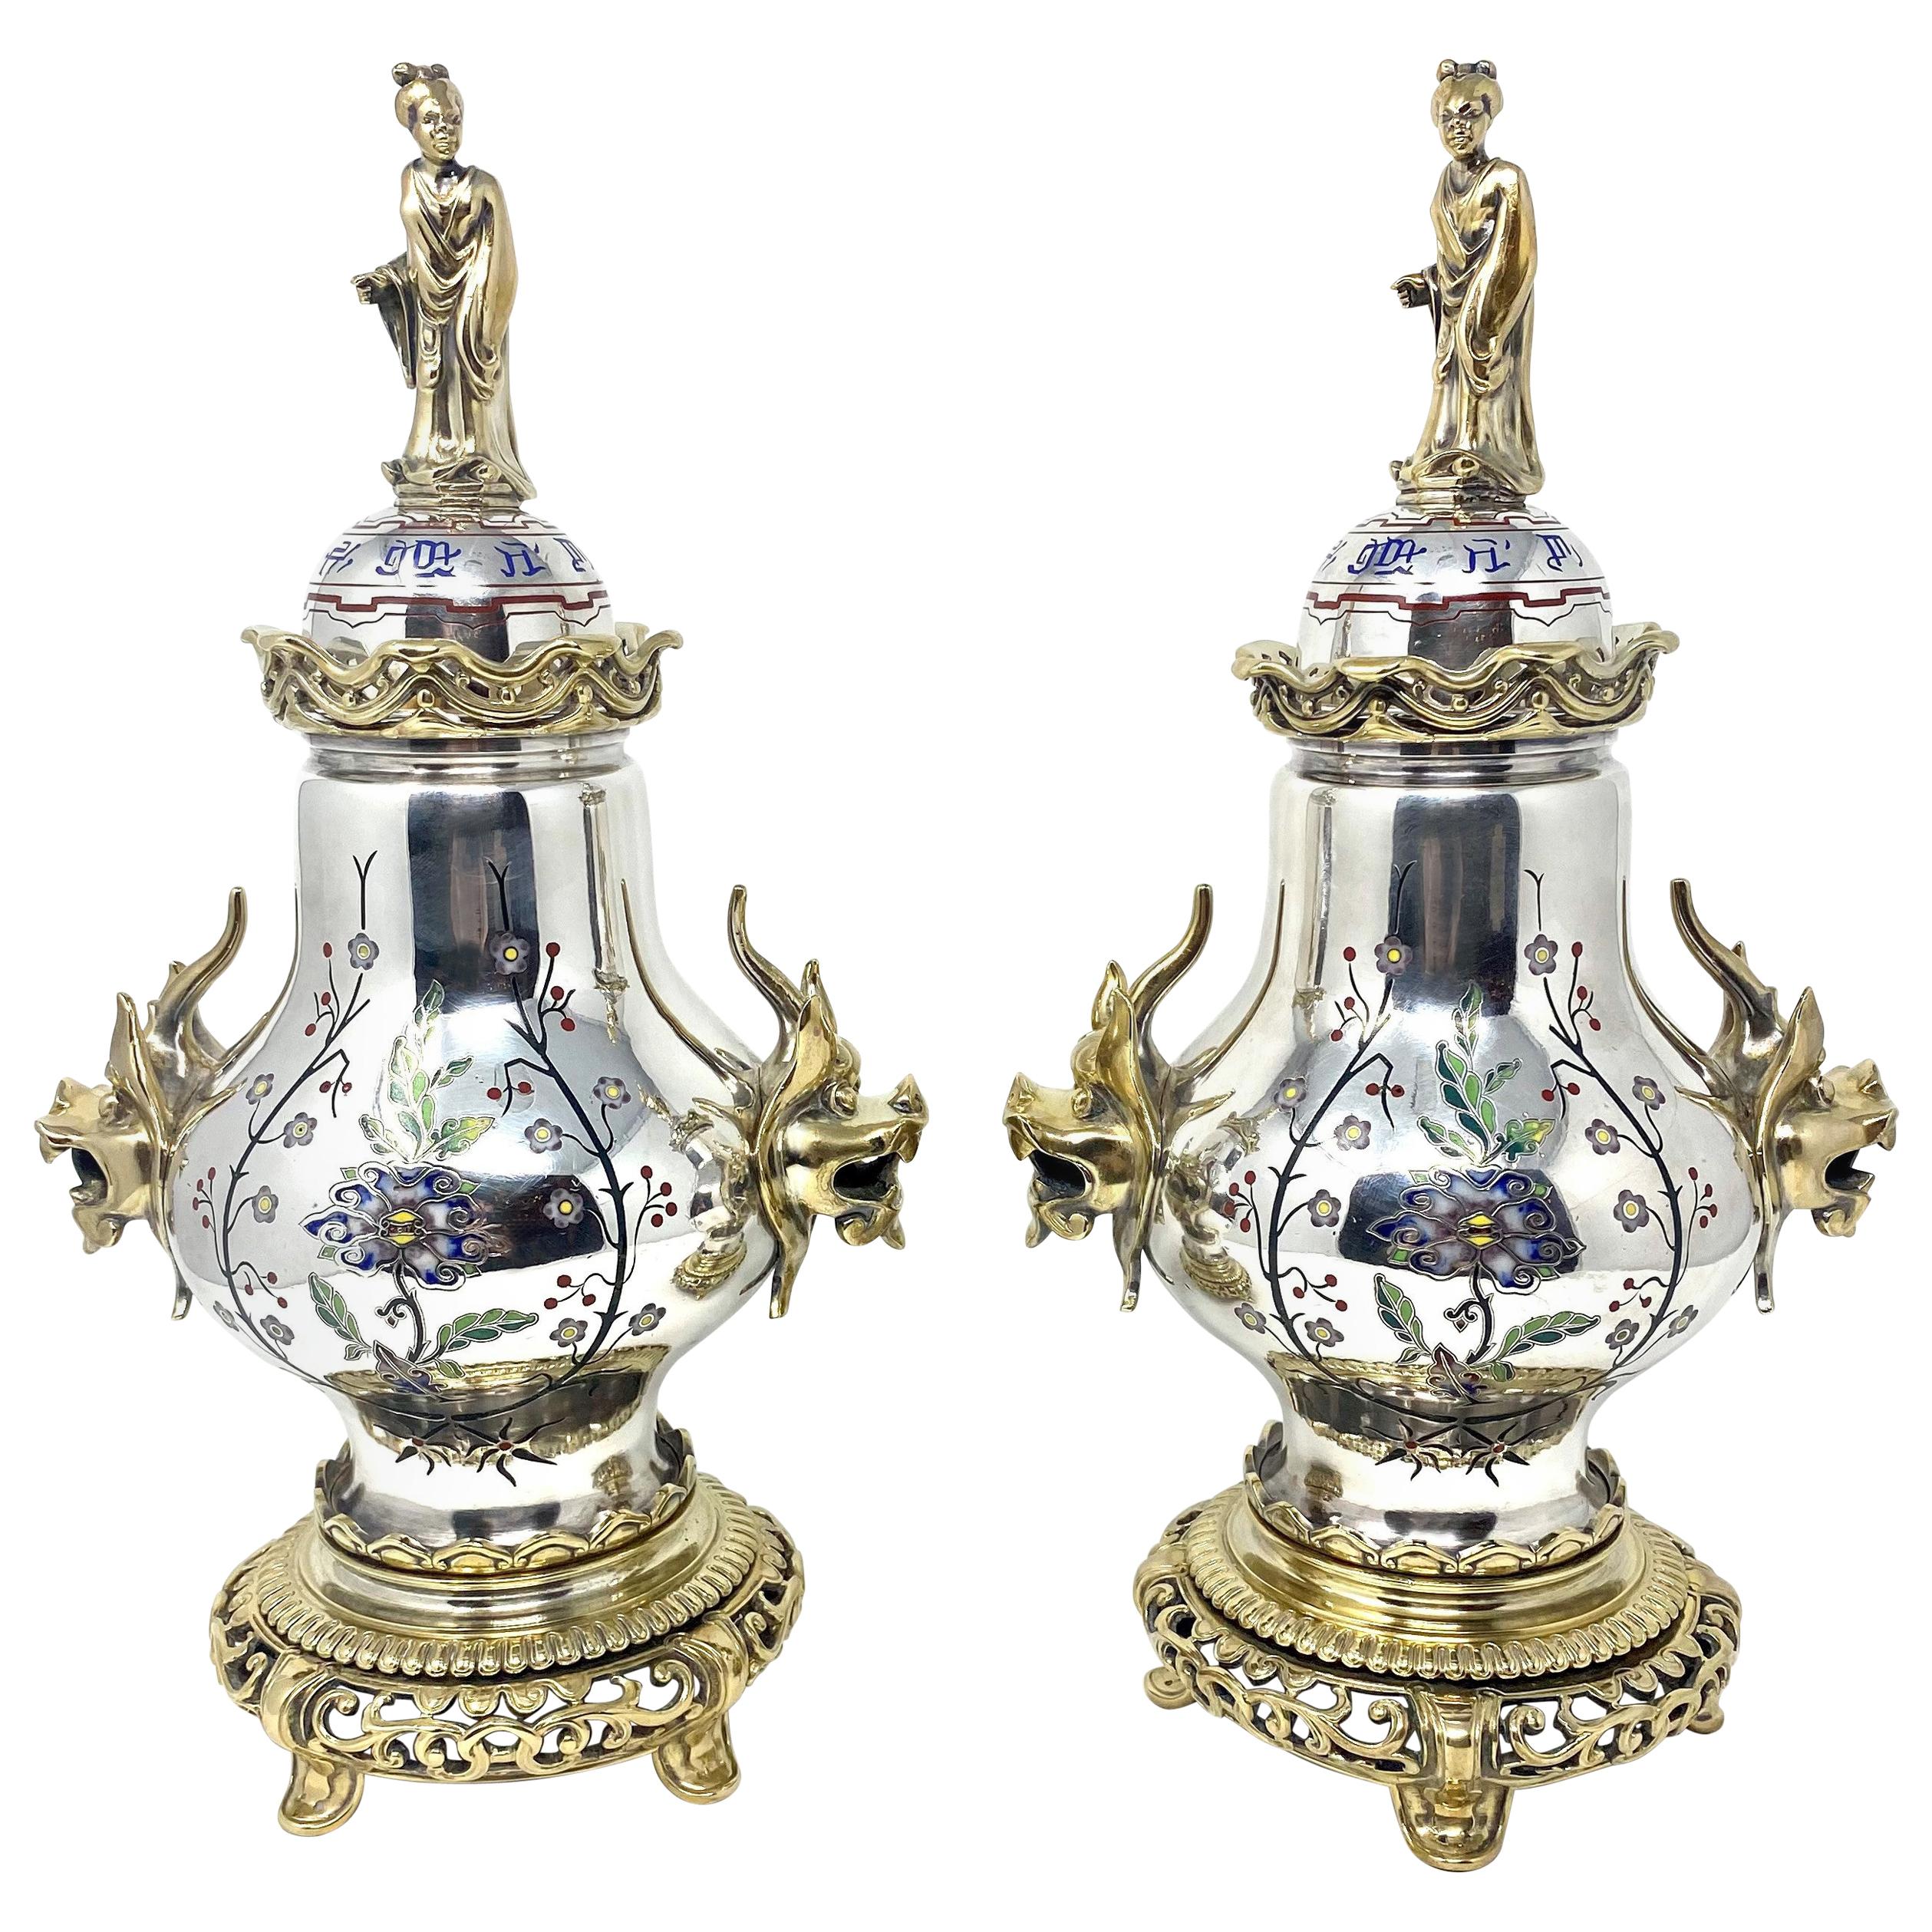 Pair of Antique 19th Century Silvered and Enameled Bronze Chinoiserie Urns